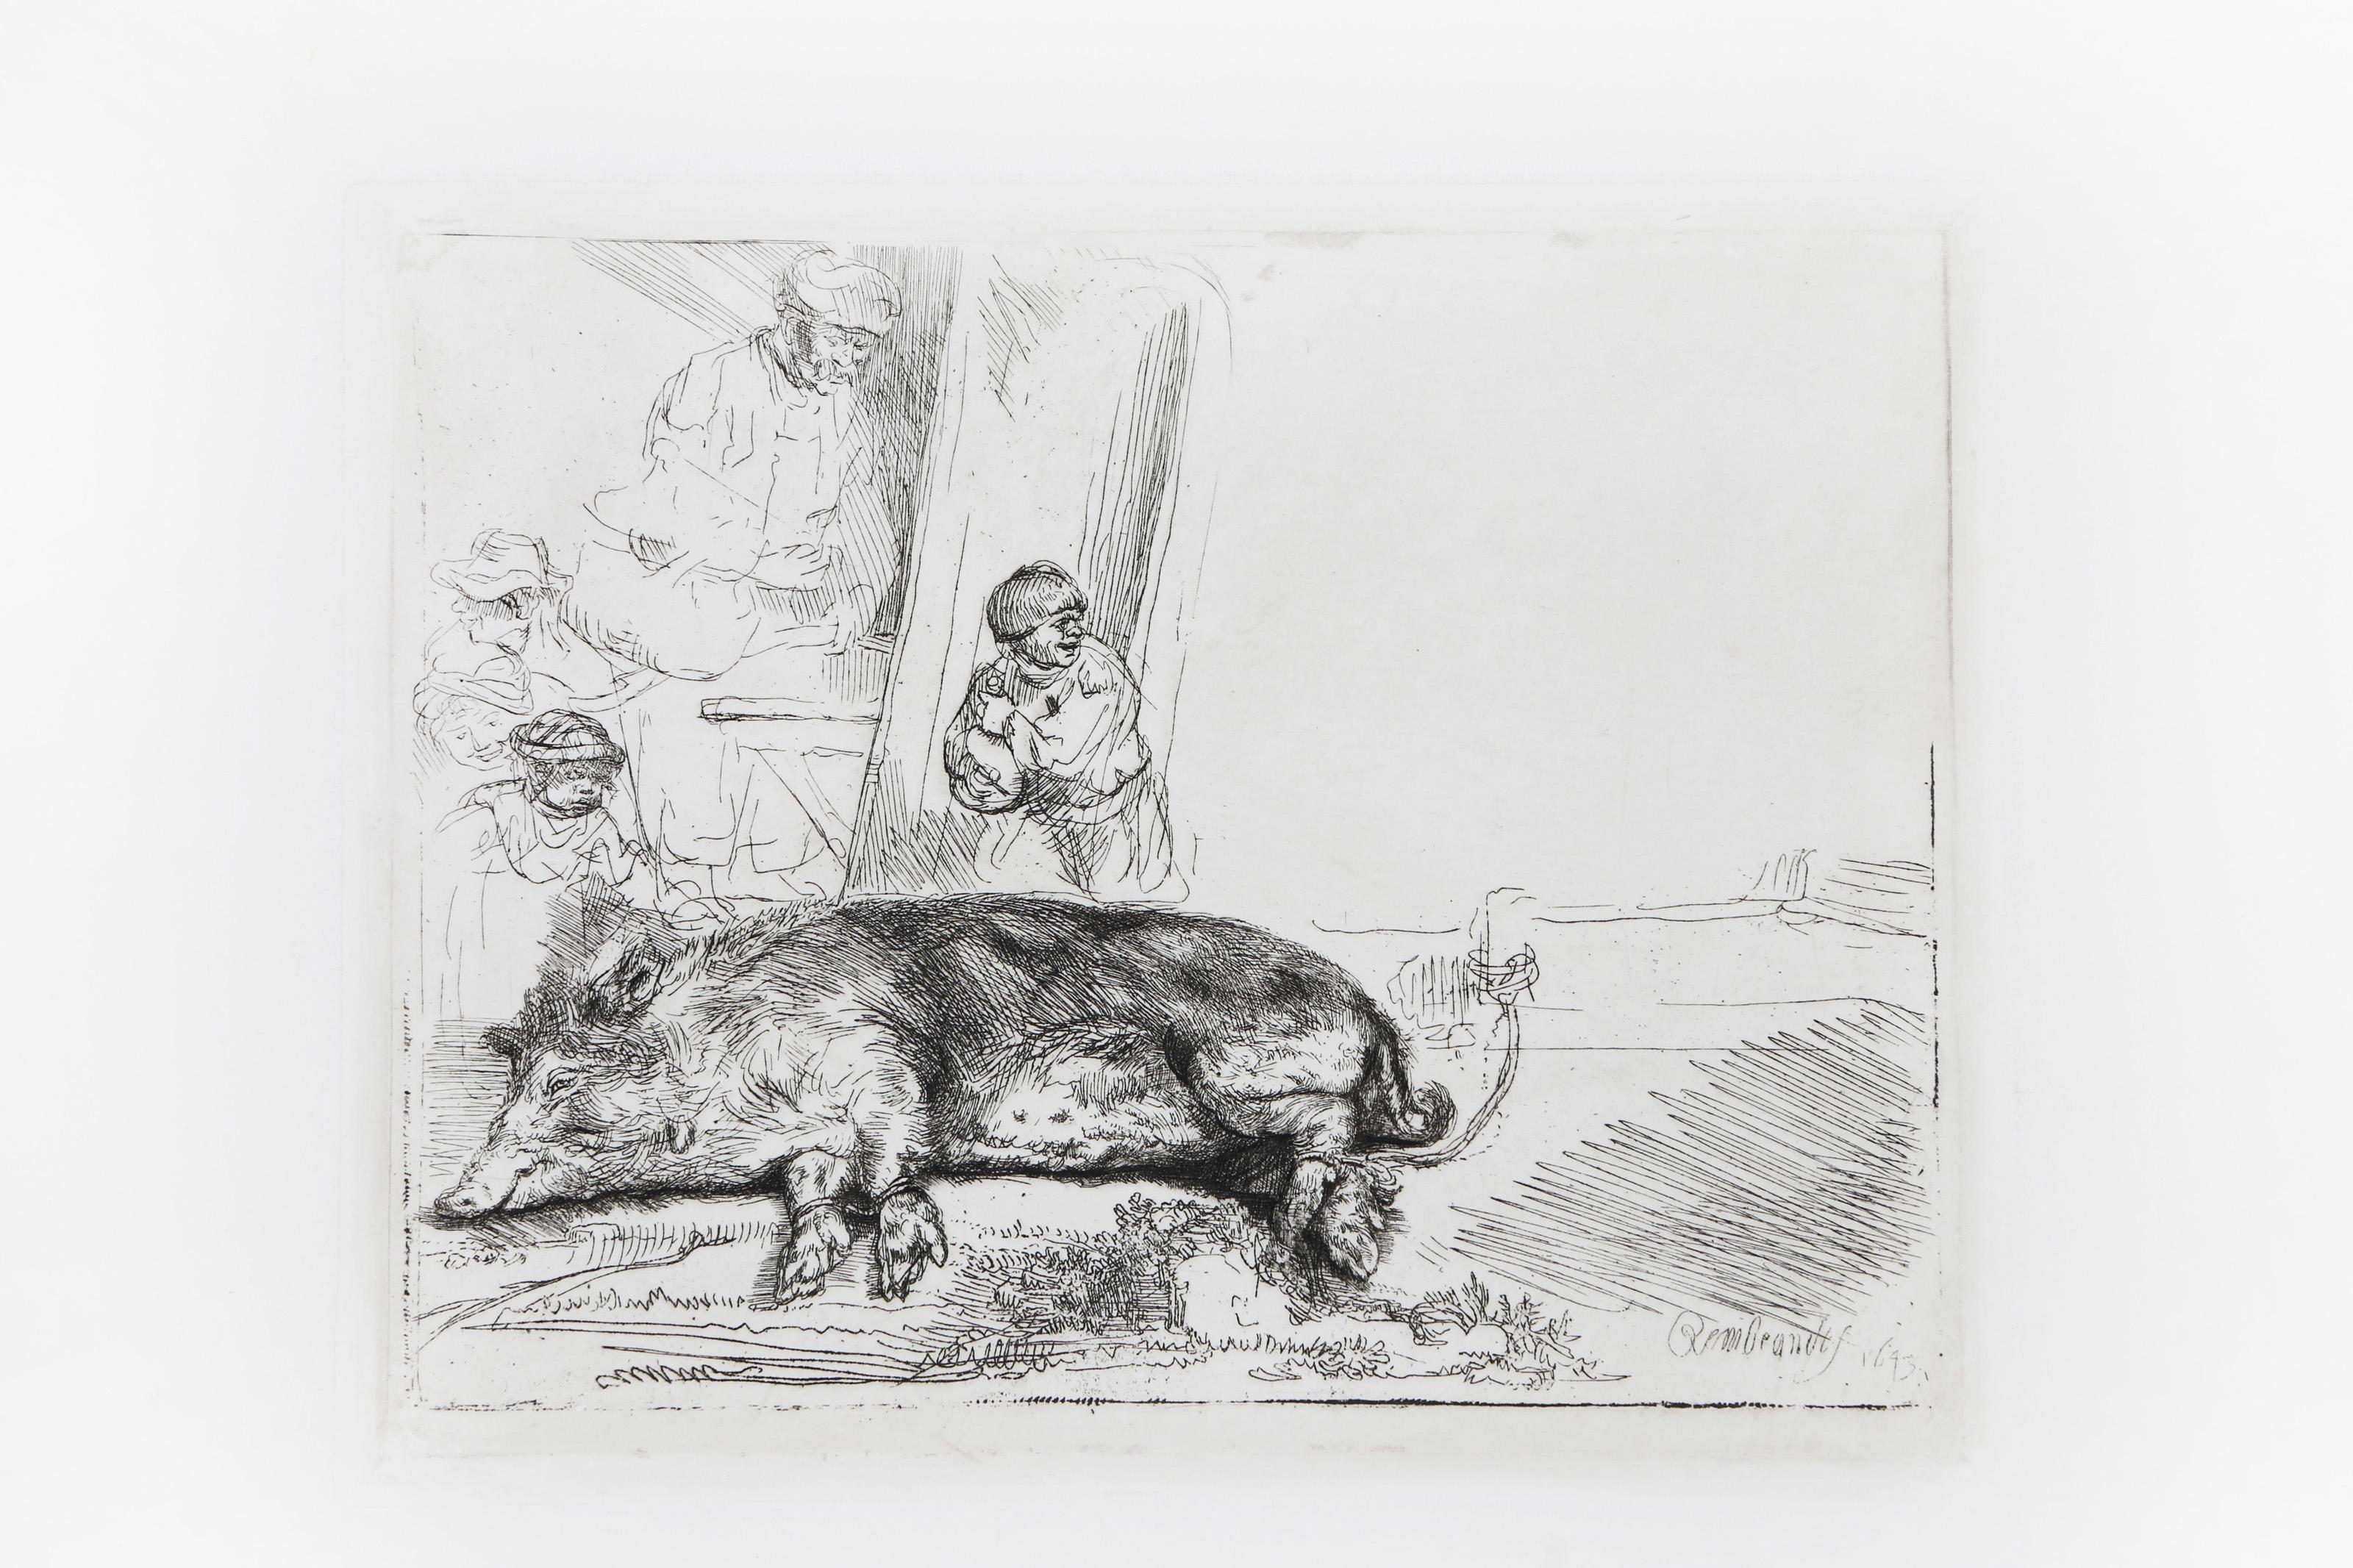  Rembrandt van Rijn, After by Amand Durand, Dutch (1606 - 1669) - The Hog, Year: Of Original 1643, Medium: Etching on Rives, Image Size: 6 x 7.25 inches, Size: 12  x 13 in. (30.48  x 33.02 cm), Printer: Amand Durand, Description: In this print,